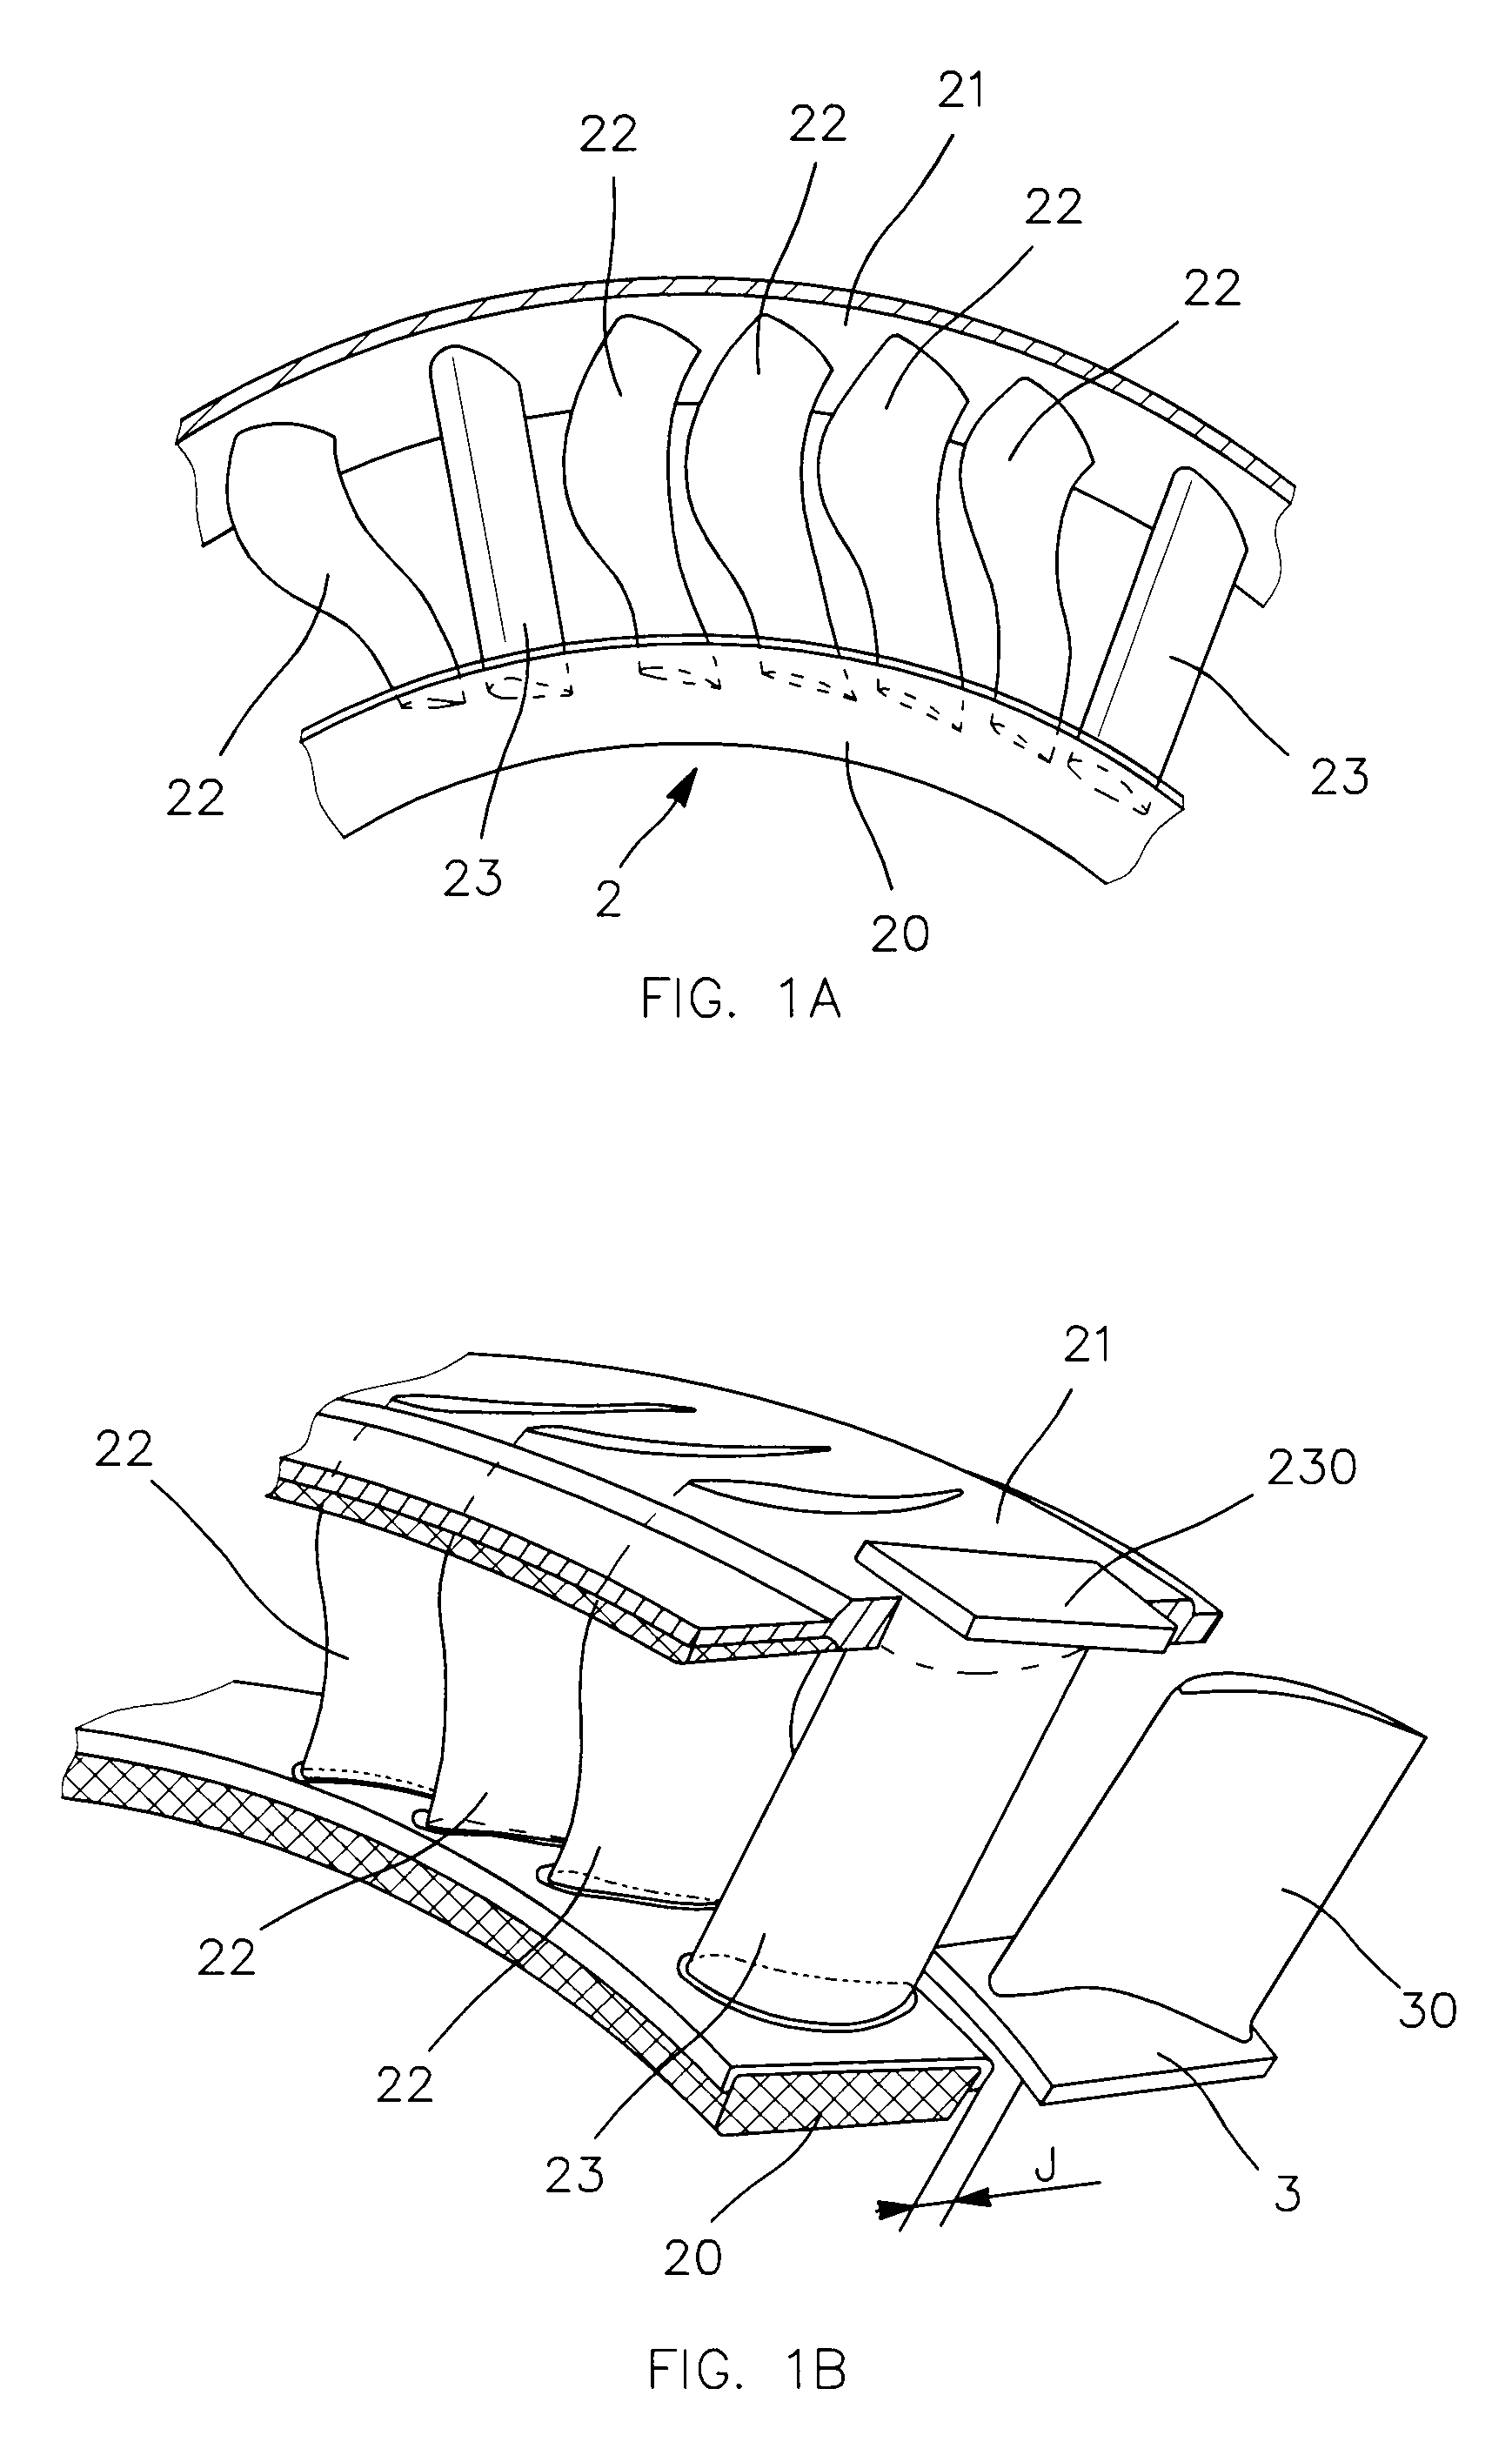 Device for stiffening the stator of a turbomachine and application to aircraft engines